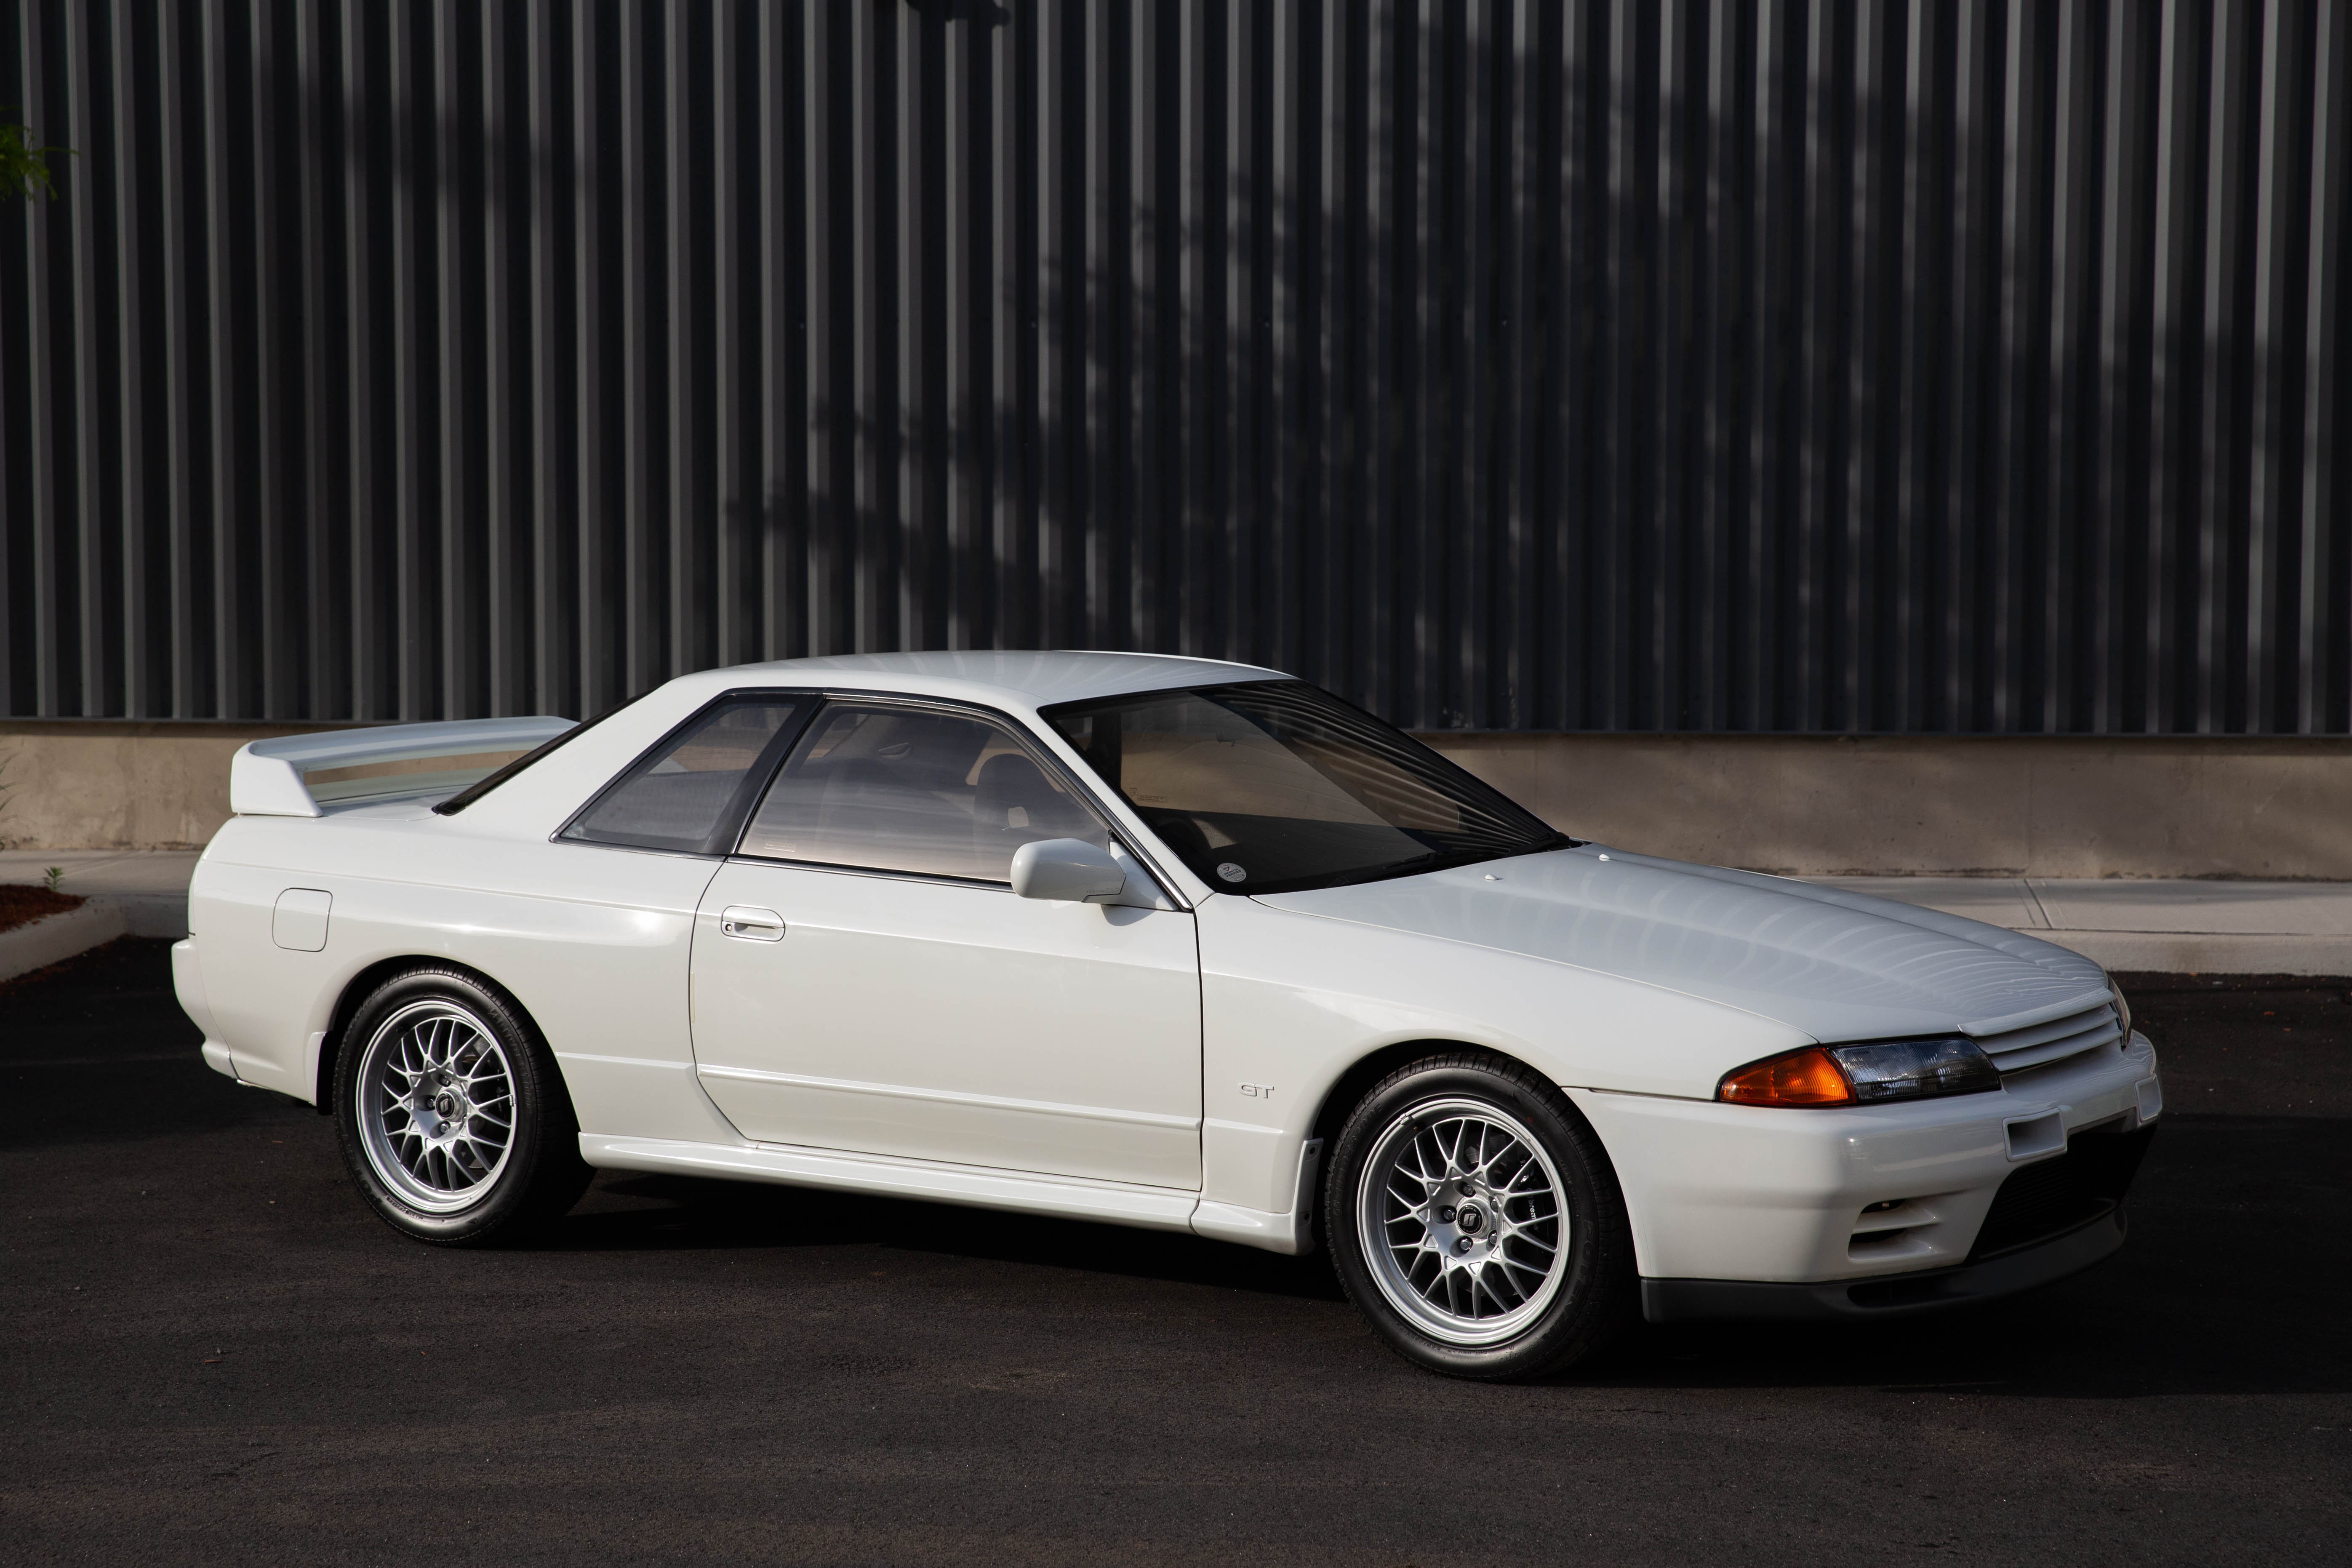 1994 Nissan Skyline R32 GT-R V-Spec II N1 Previously Sold | The